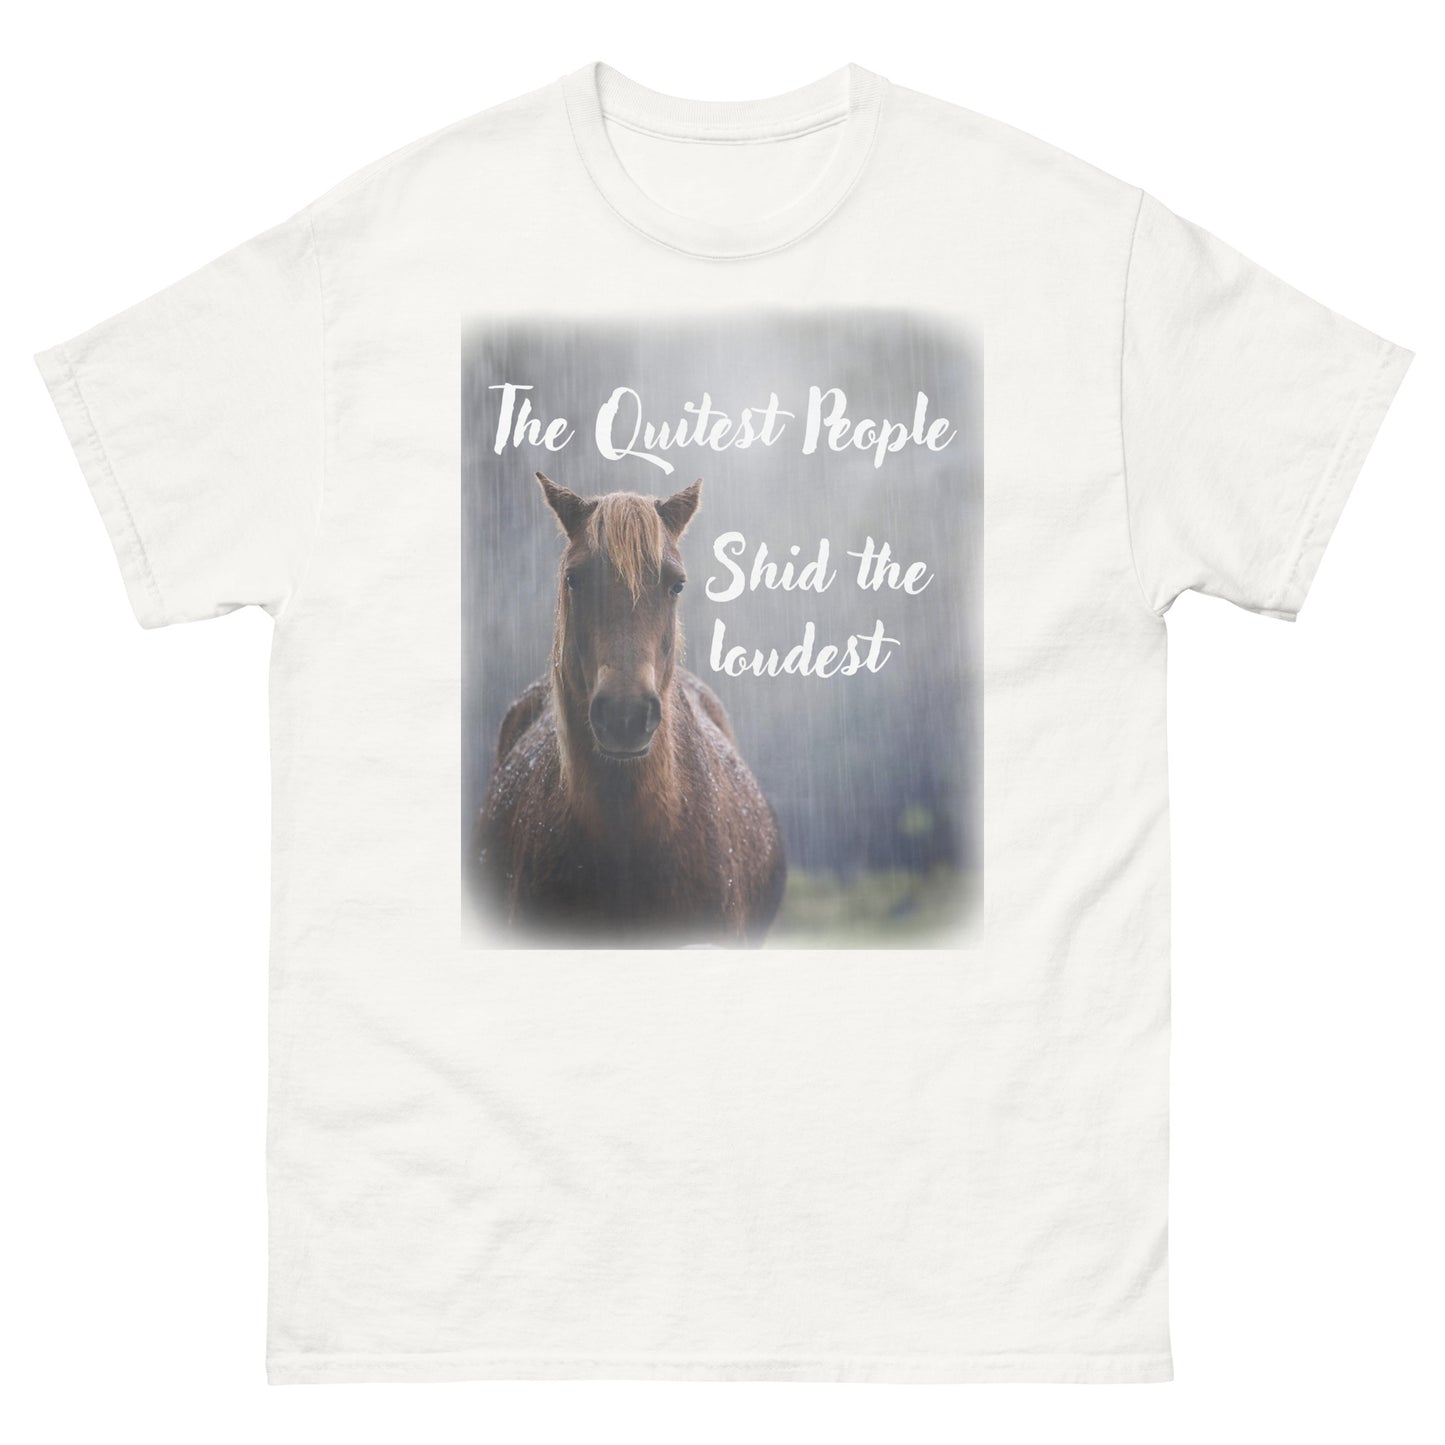 The Quietest People Shirt